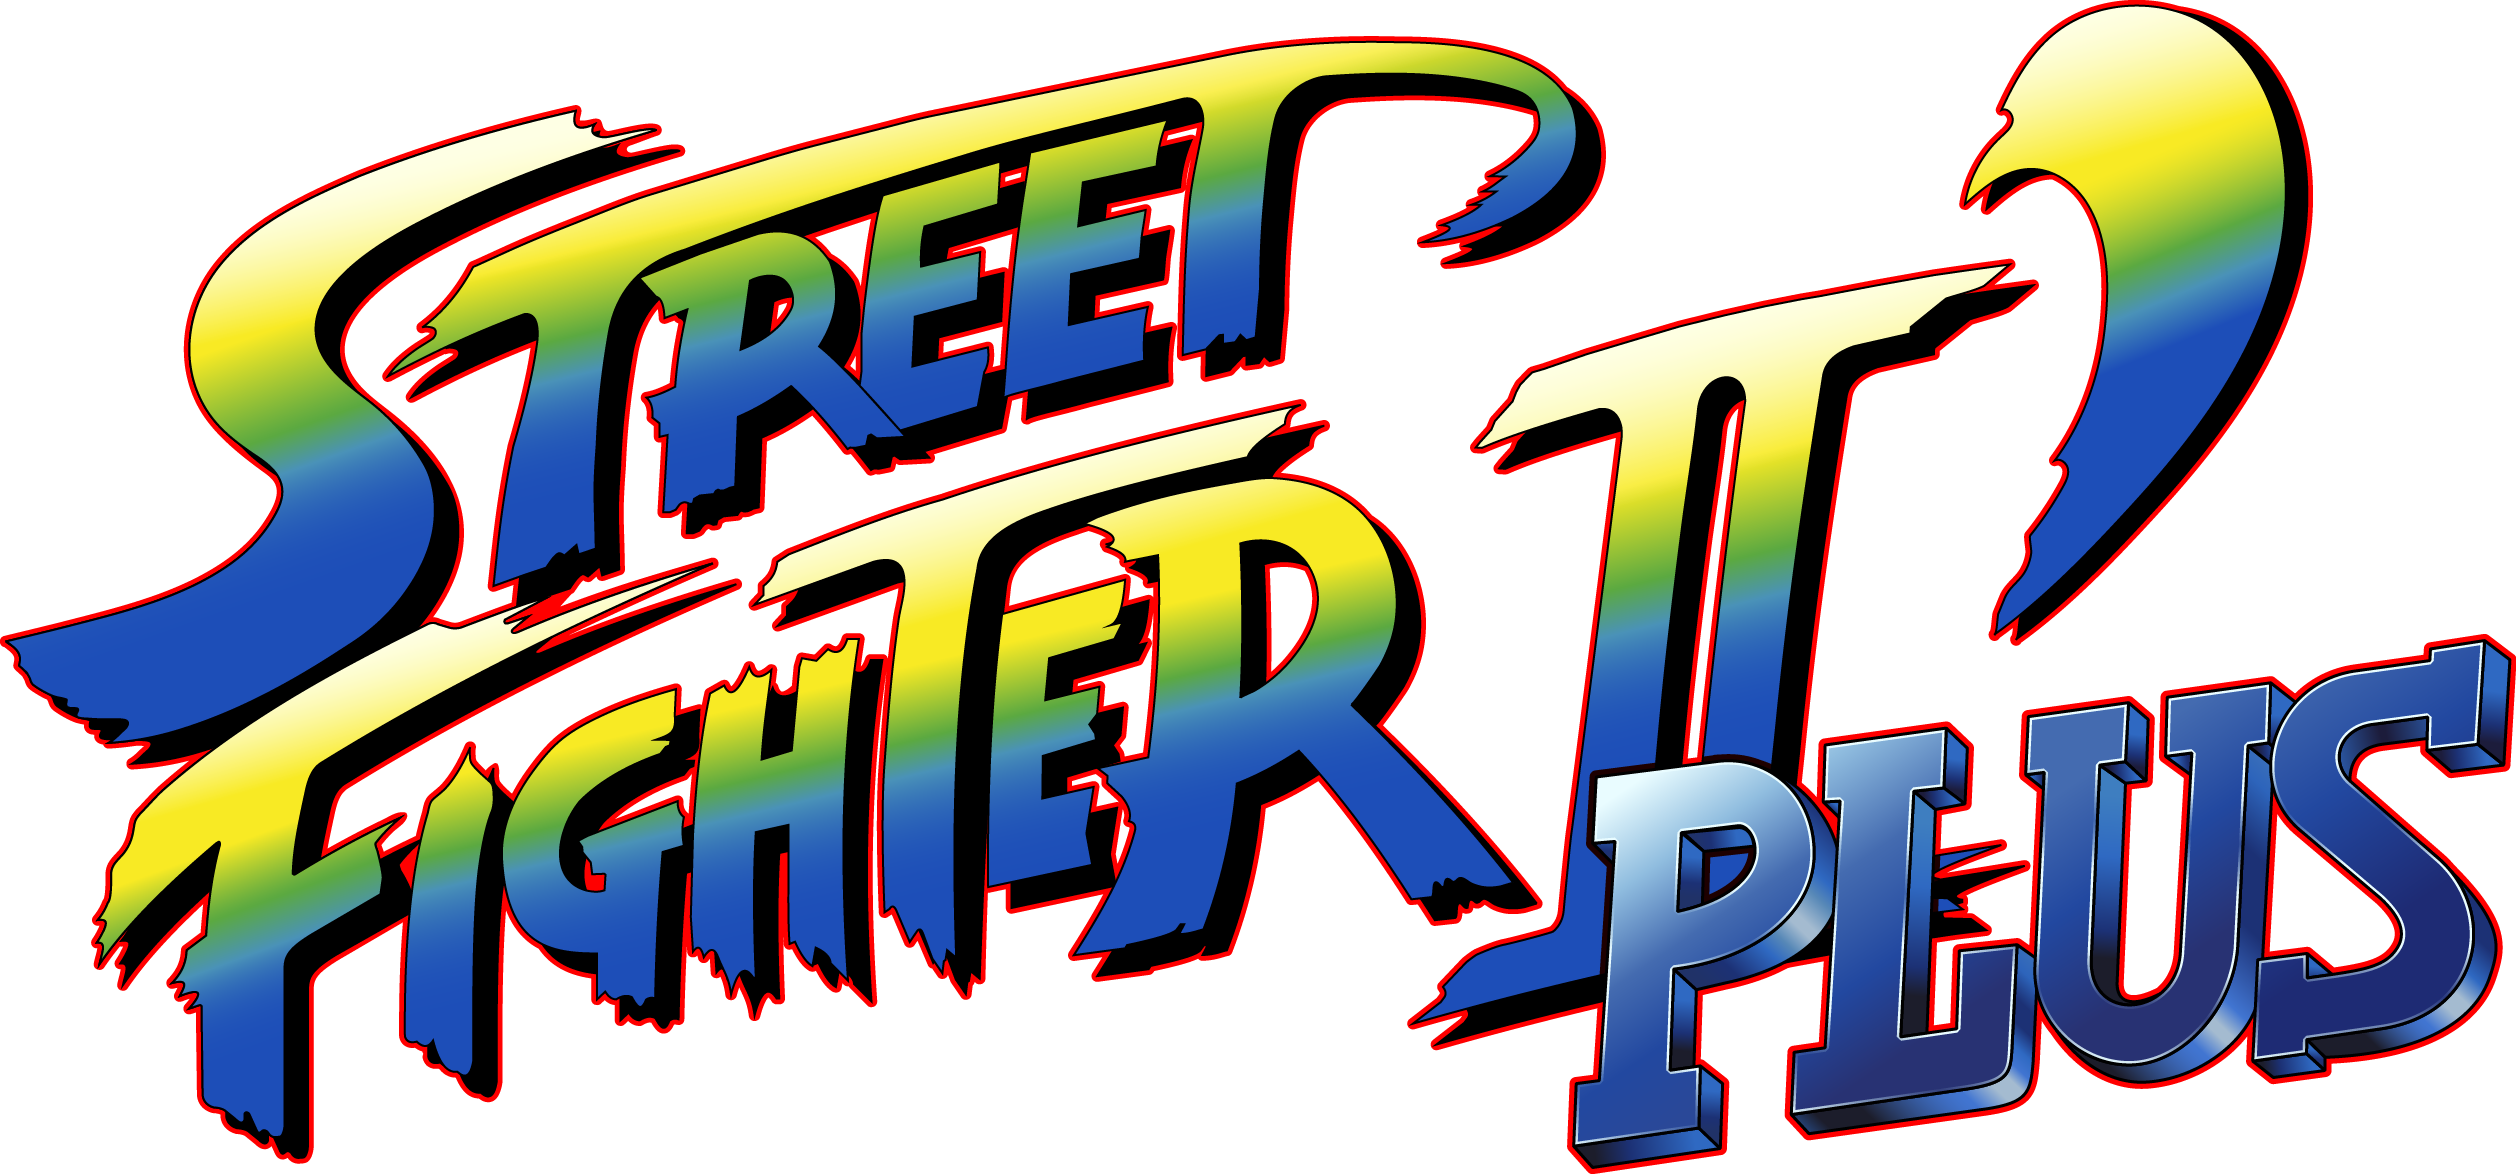 Download Street Fighter Ii Png Pic 370 - Street Fighter 2 Vector (2516x1174)